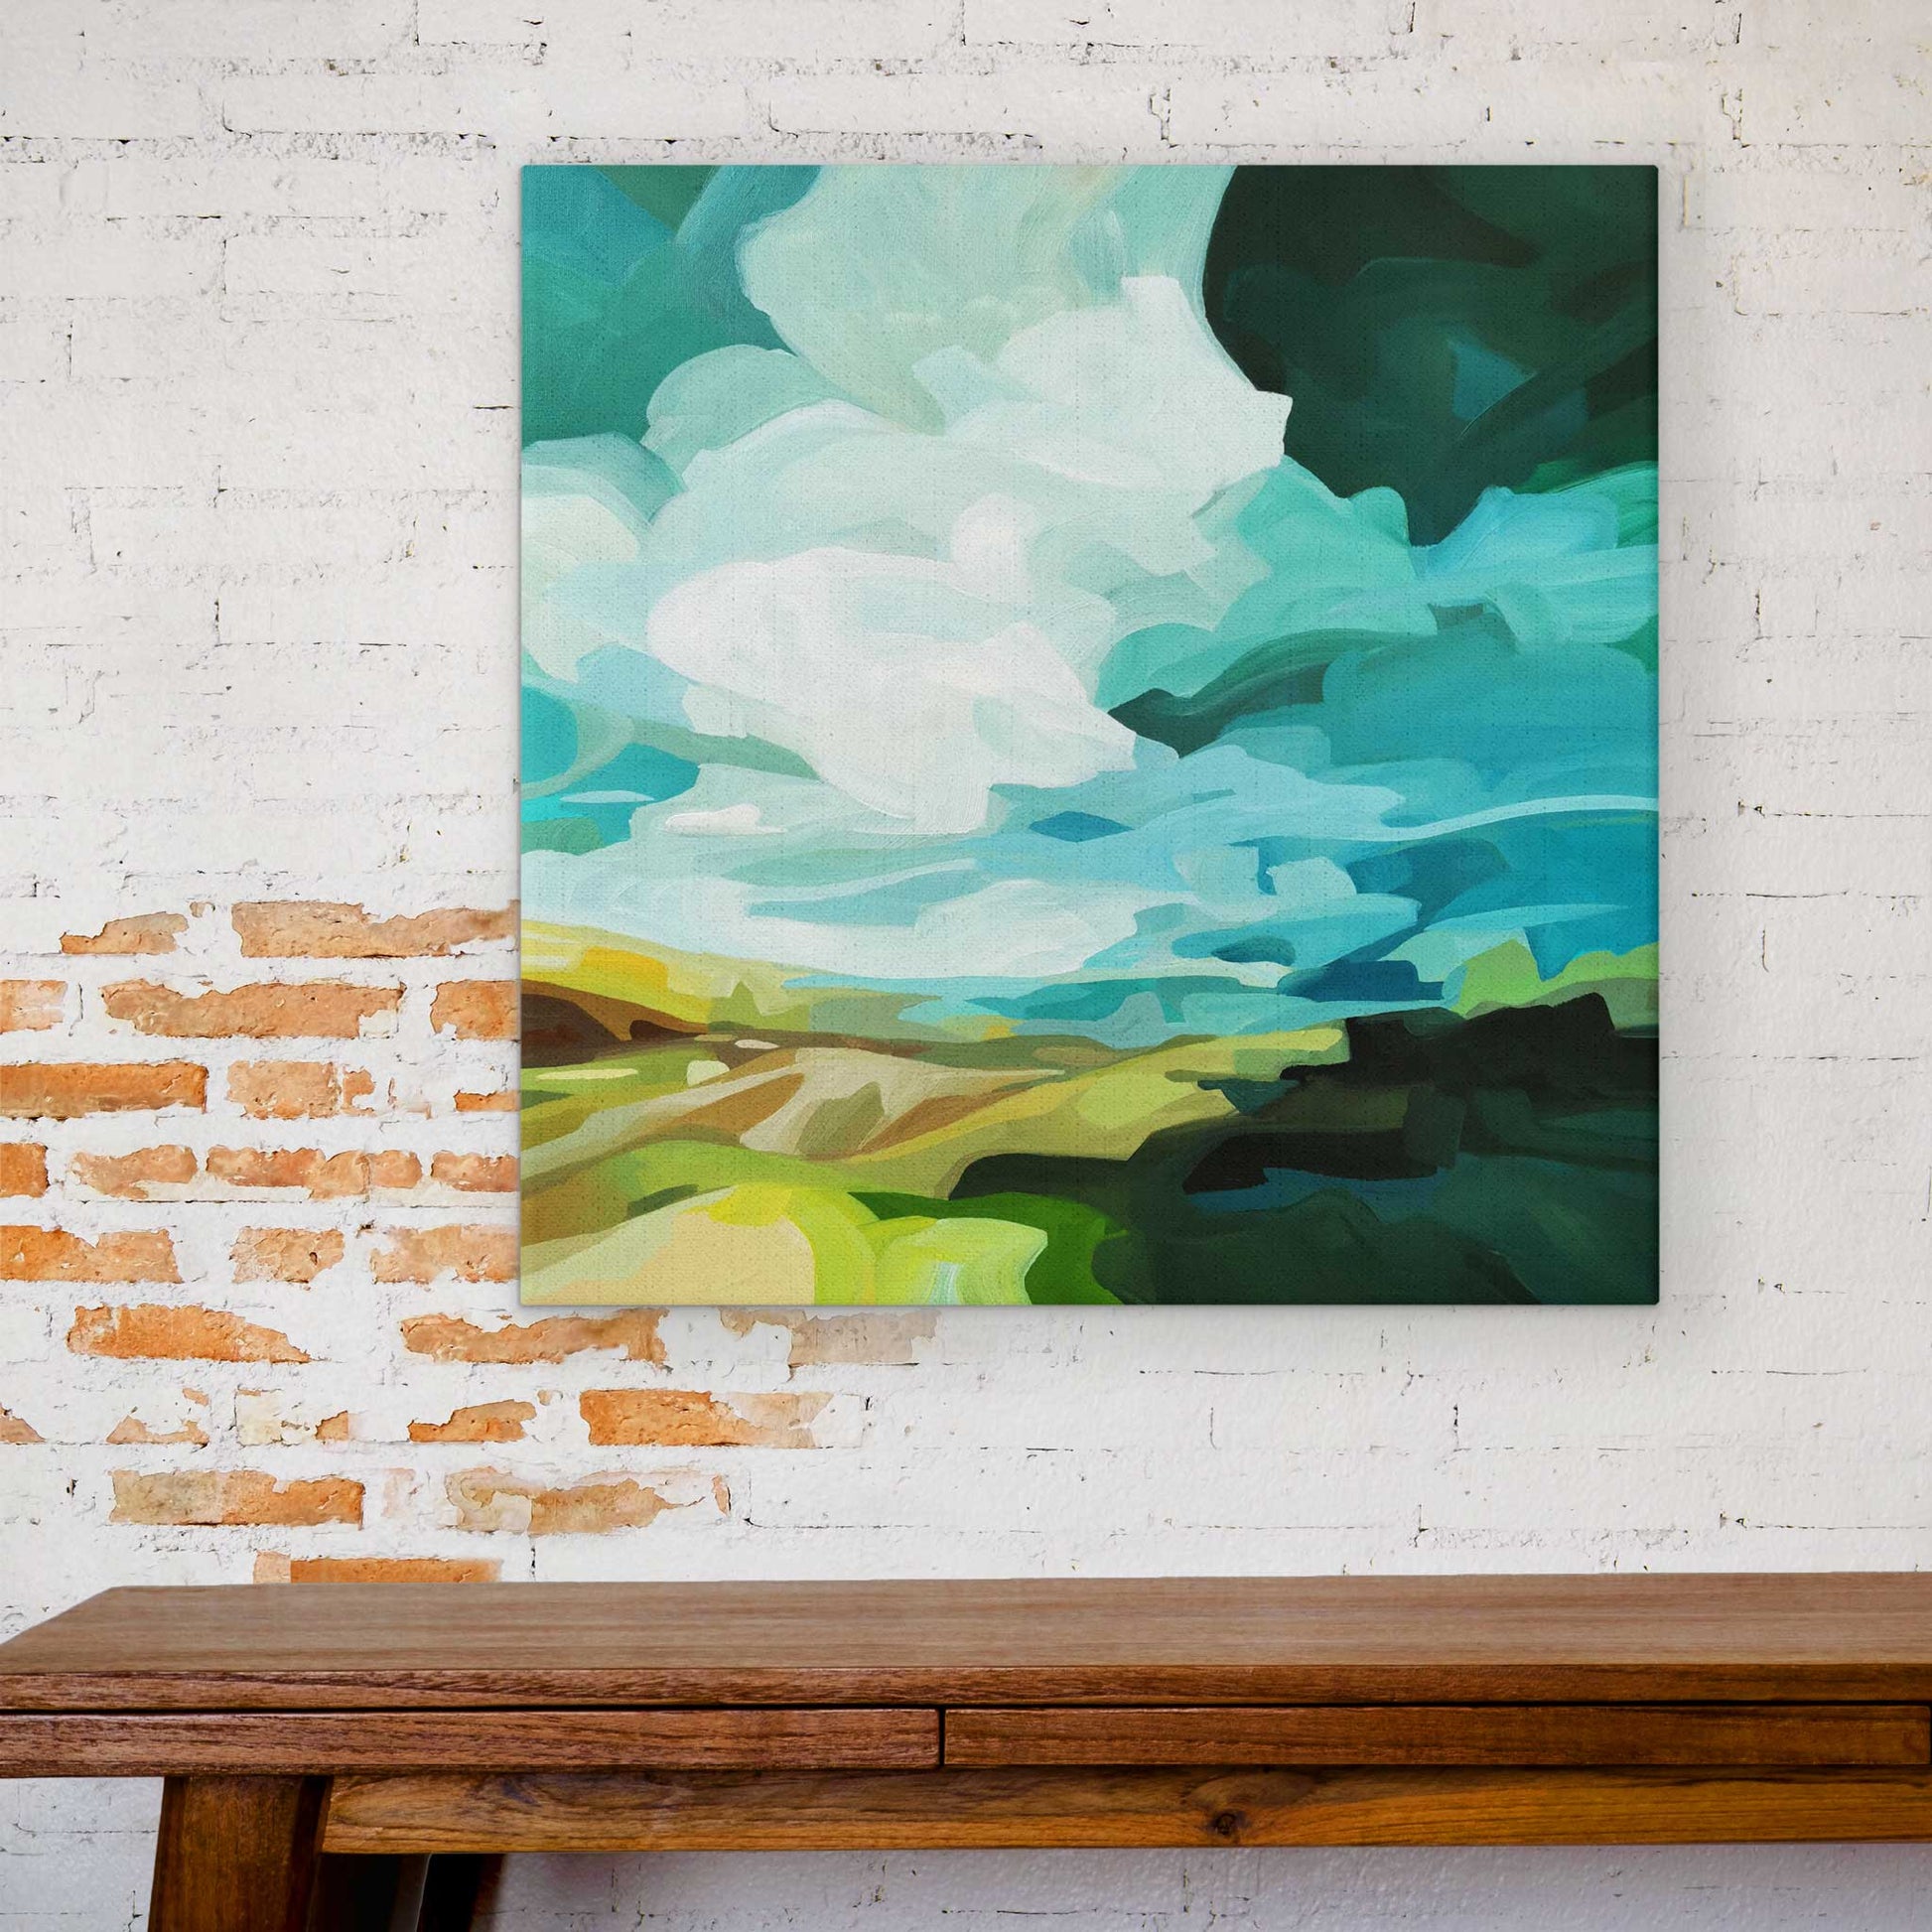 Contemporary abstract lakes & forest landscape acrylic original painting on gallery wrapped canvas by Susannah Bee.